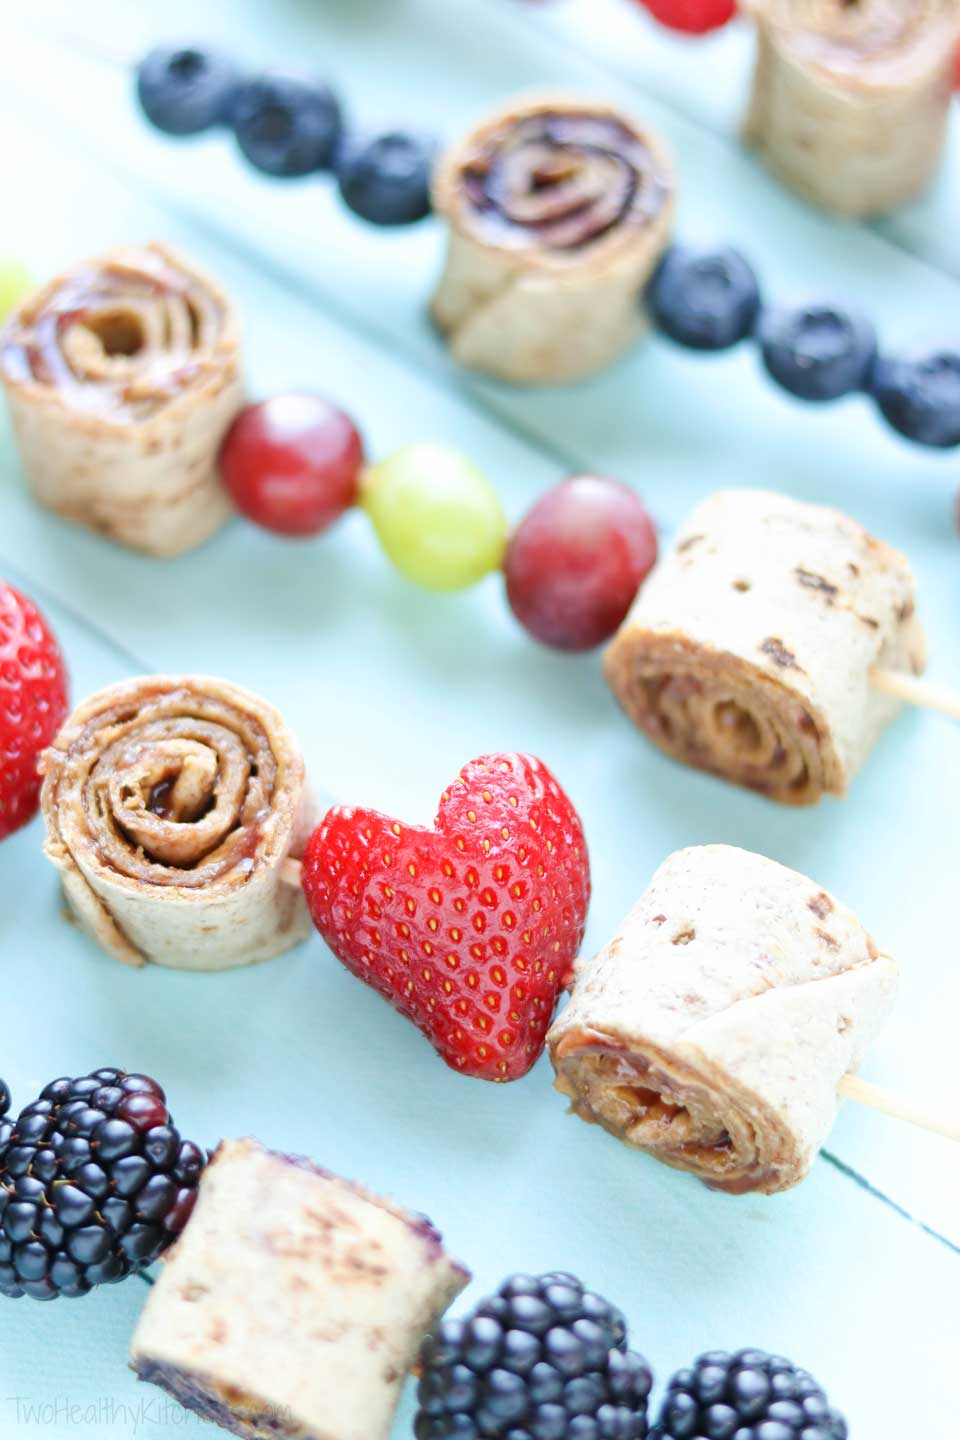 skewers of fruit and PB&J pinwheels, with heart-shaped strawberry